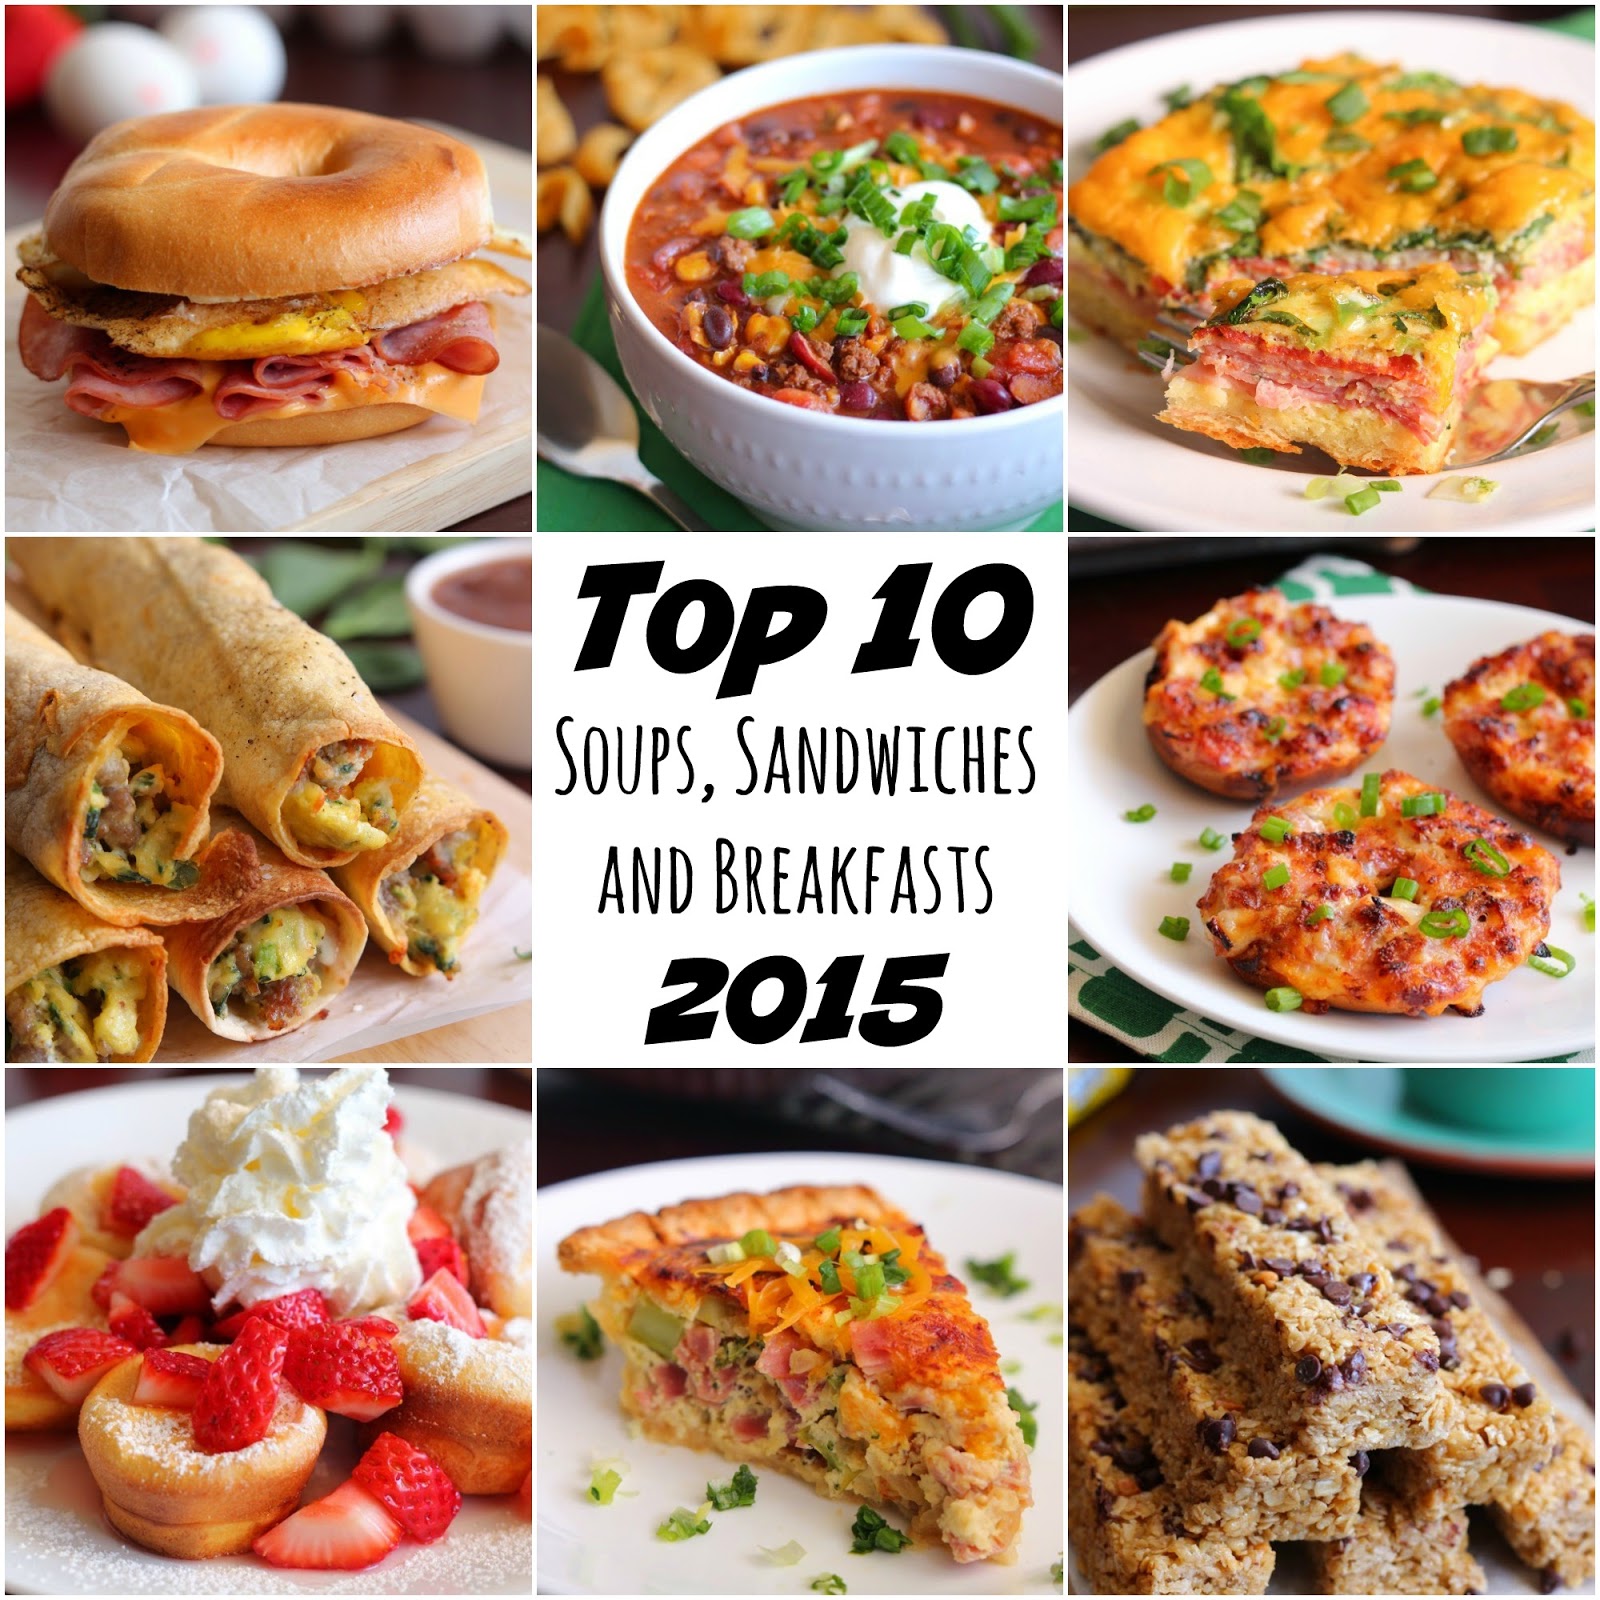 Eat Cake For Dinner: Top 10 Soups, Sandwiches and Breakfast Dishes of 2015